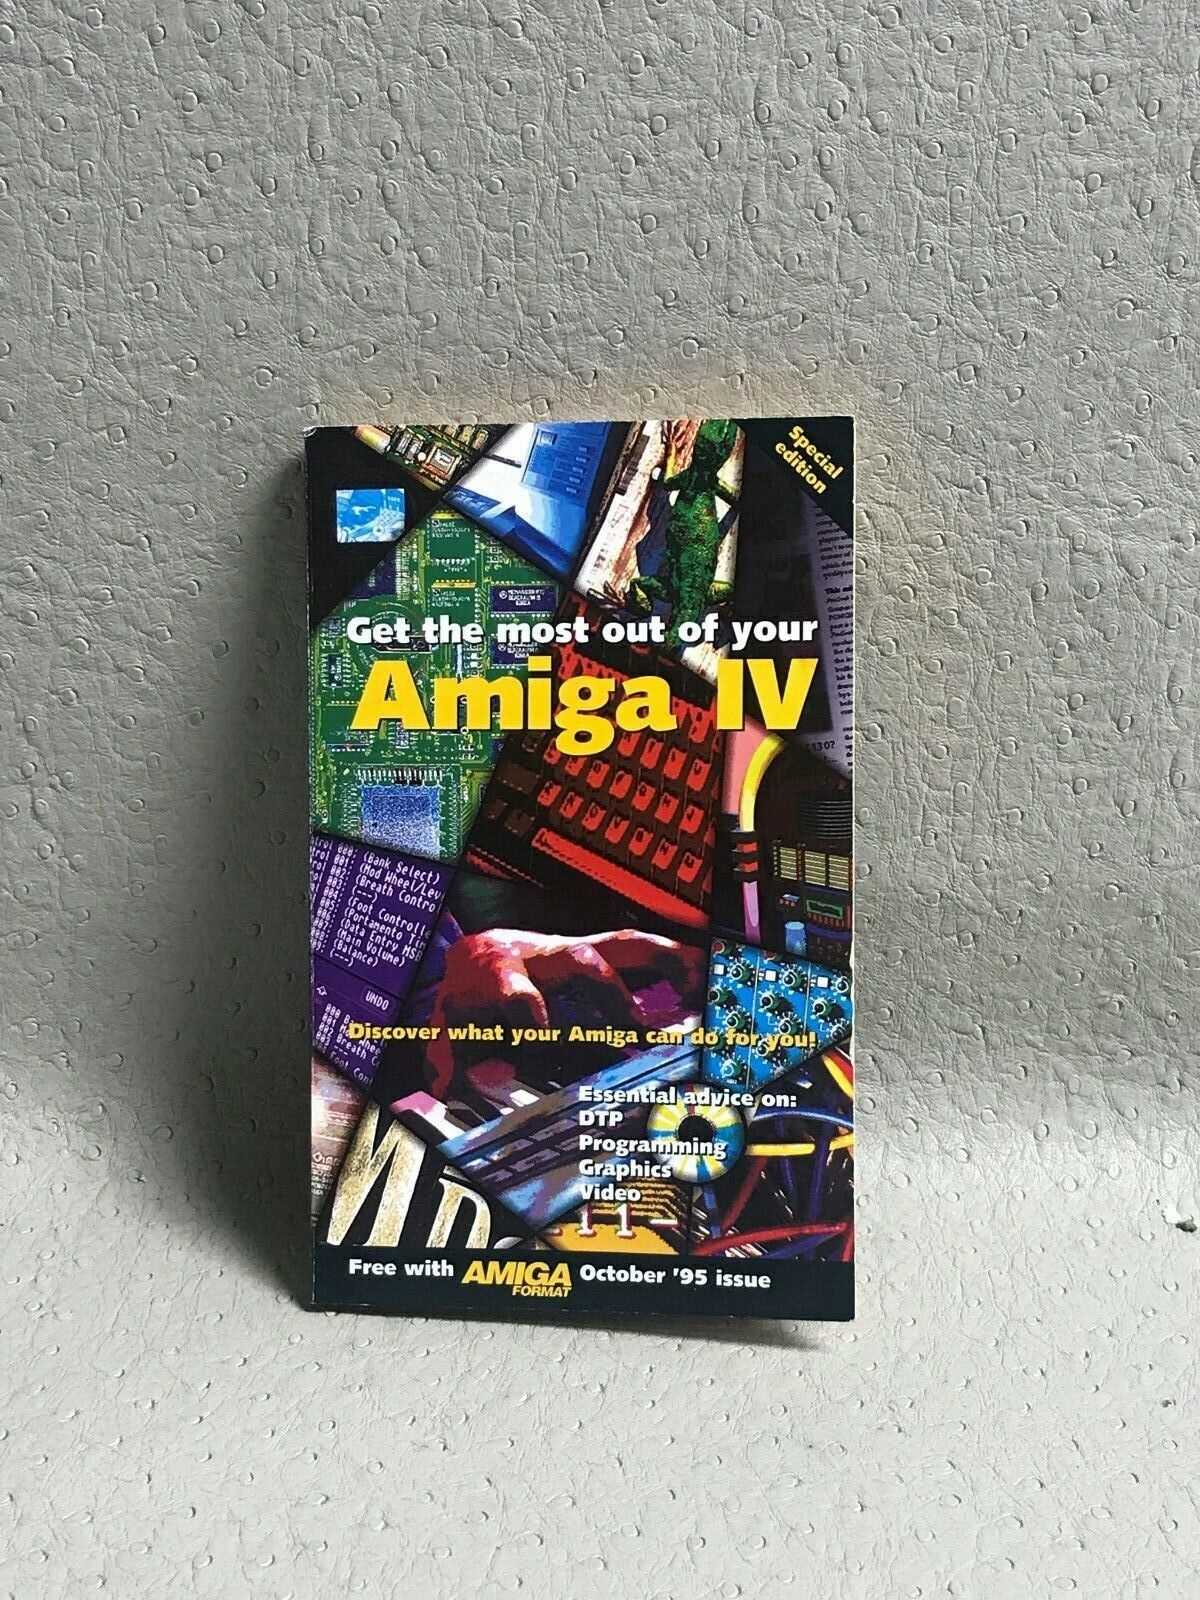 Get the Most Out of Your Amiga IV Guide for the Amiga | #3676